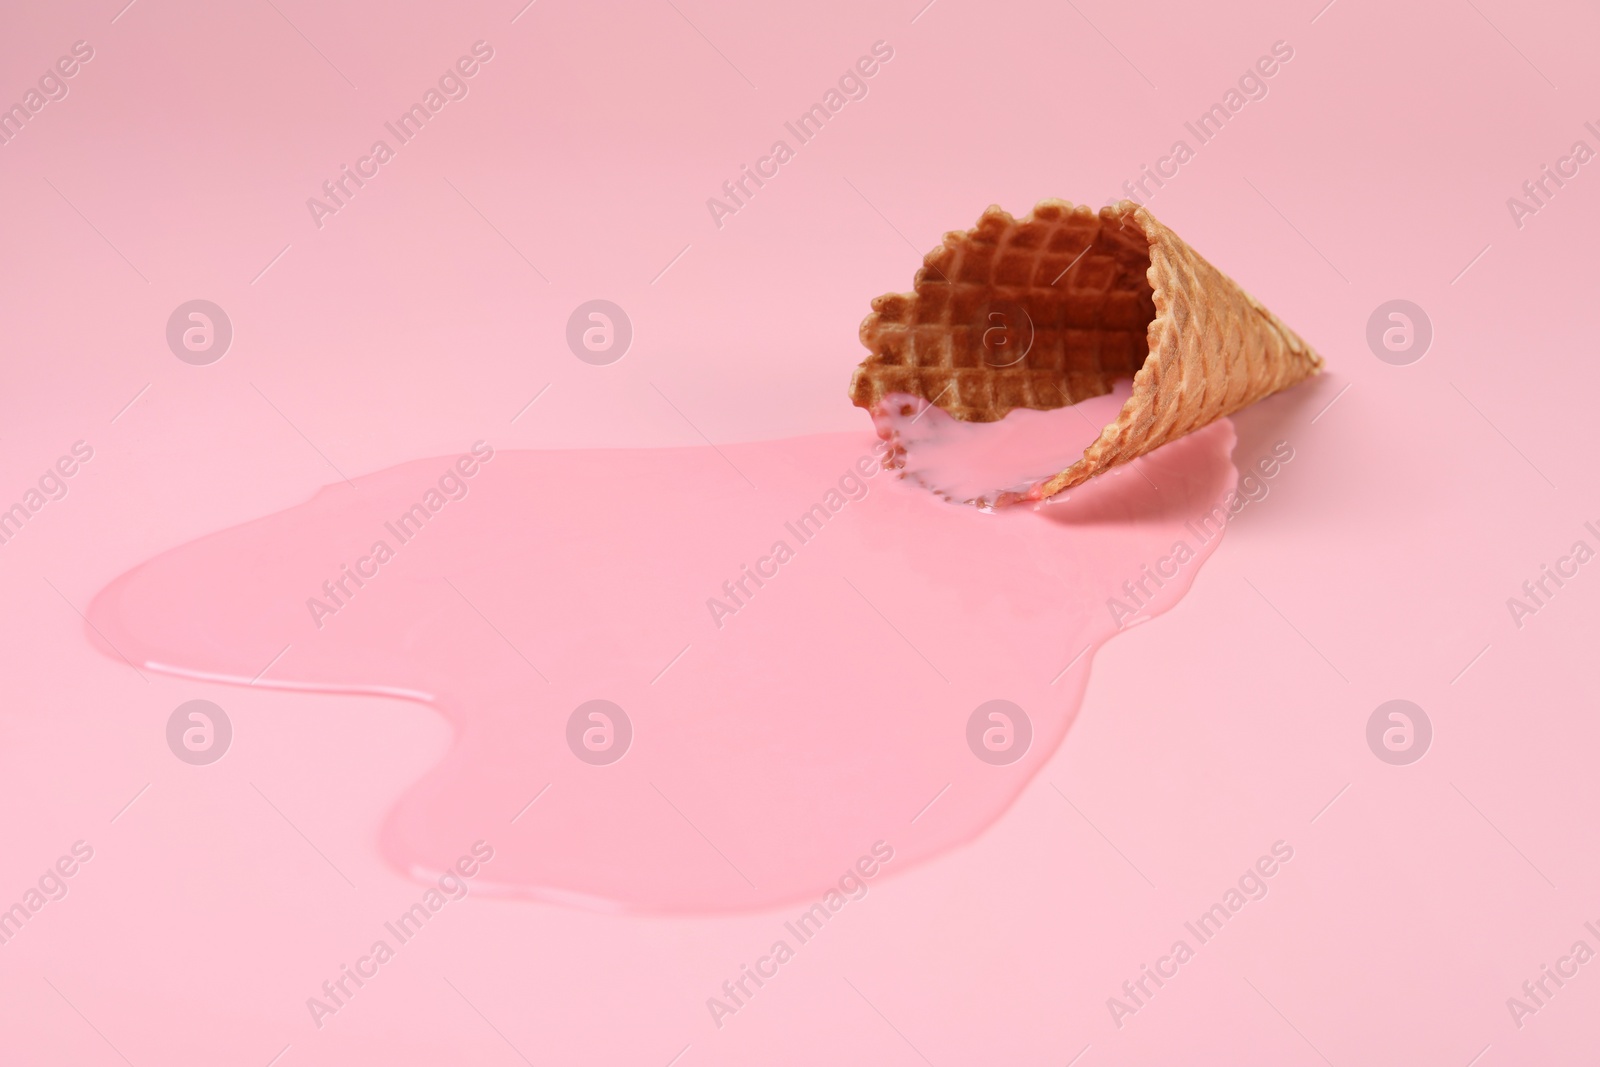 Photo of Melted ice cream and wafer cone on pink background